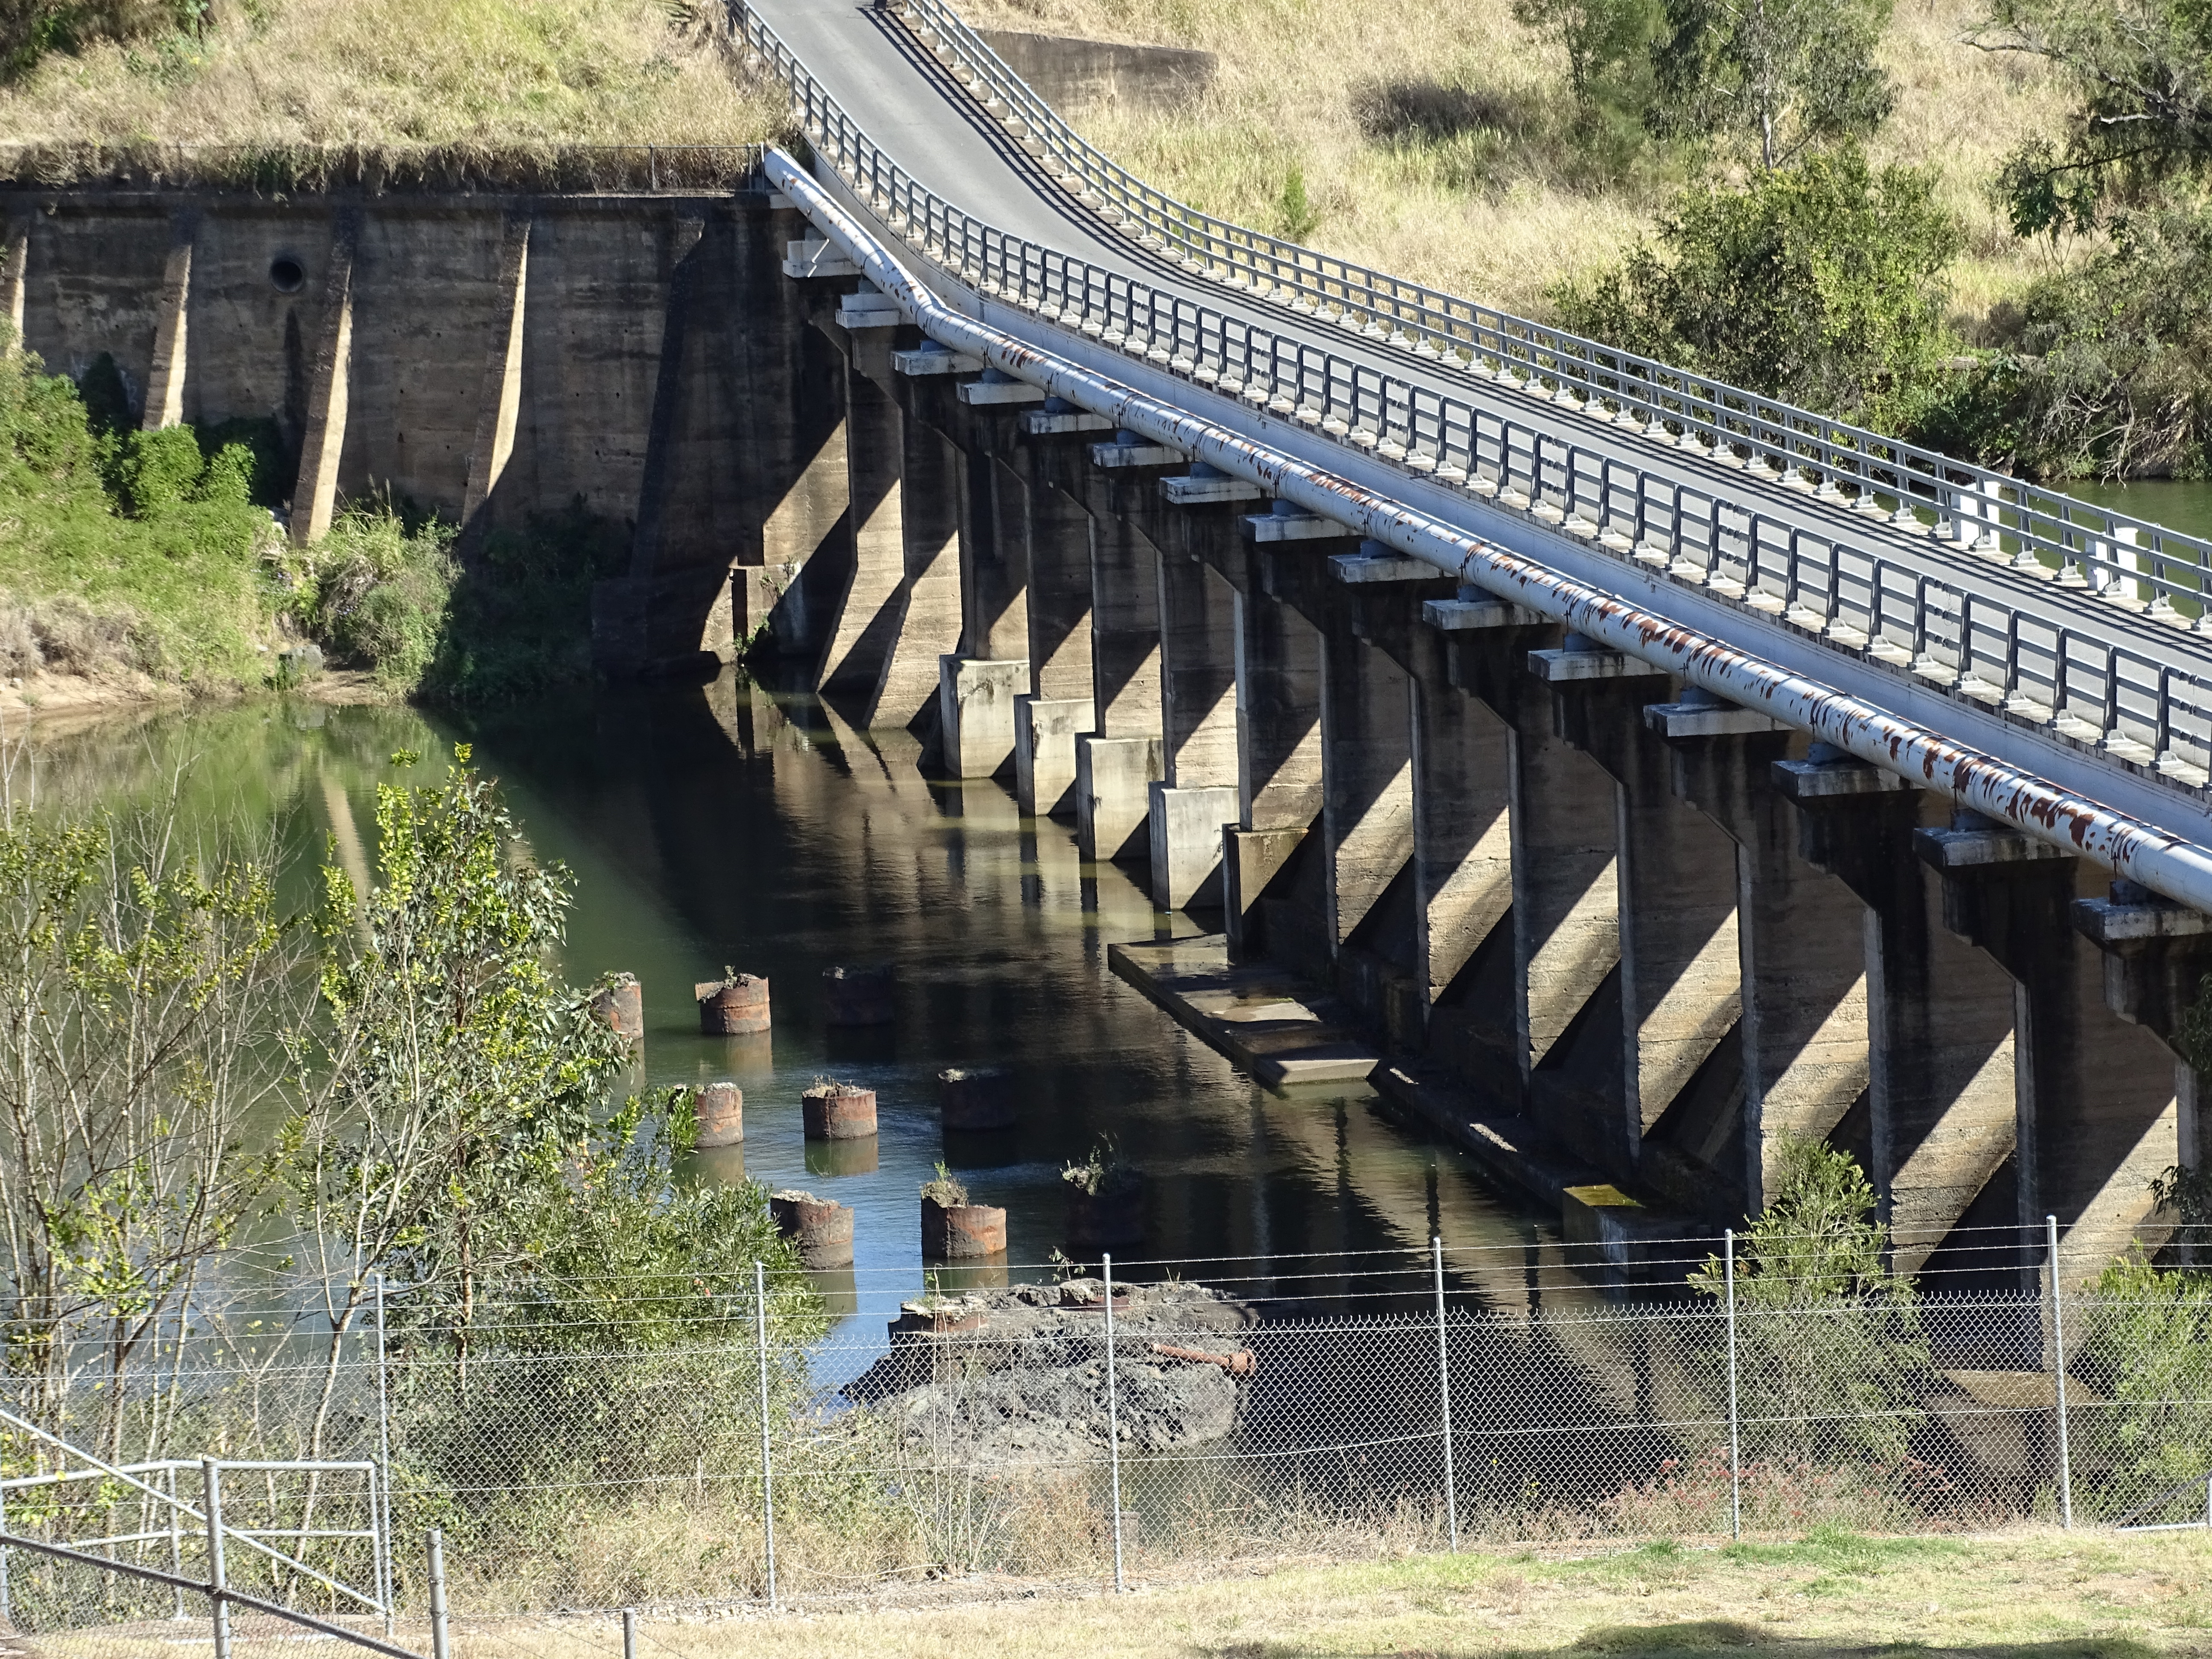 This is an image of the local heritage place known as Mt Crosby Weir & Old Bridge Foundations.